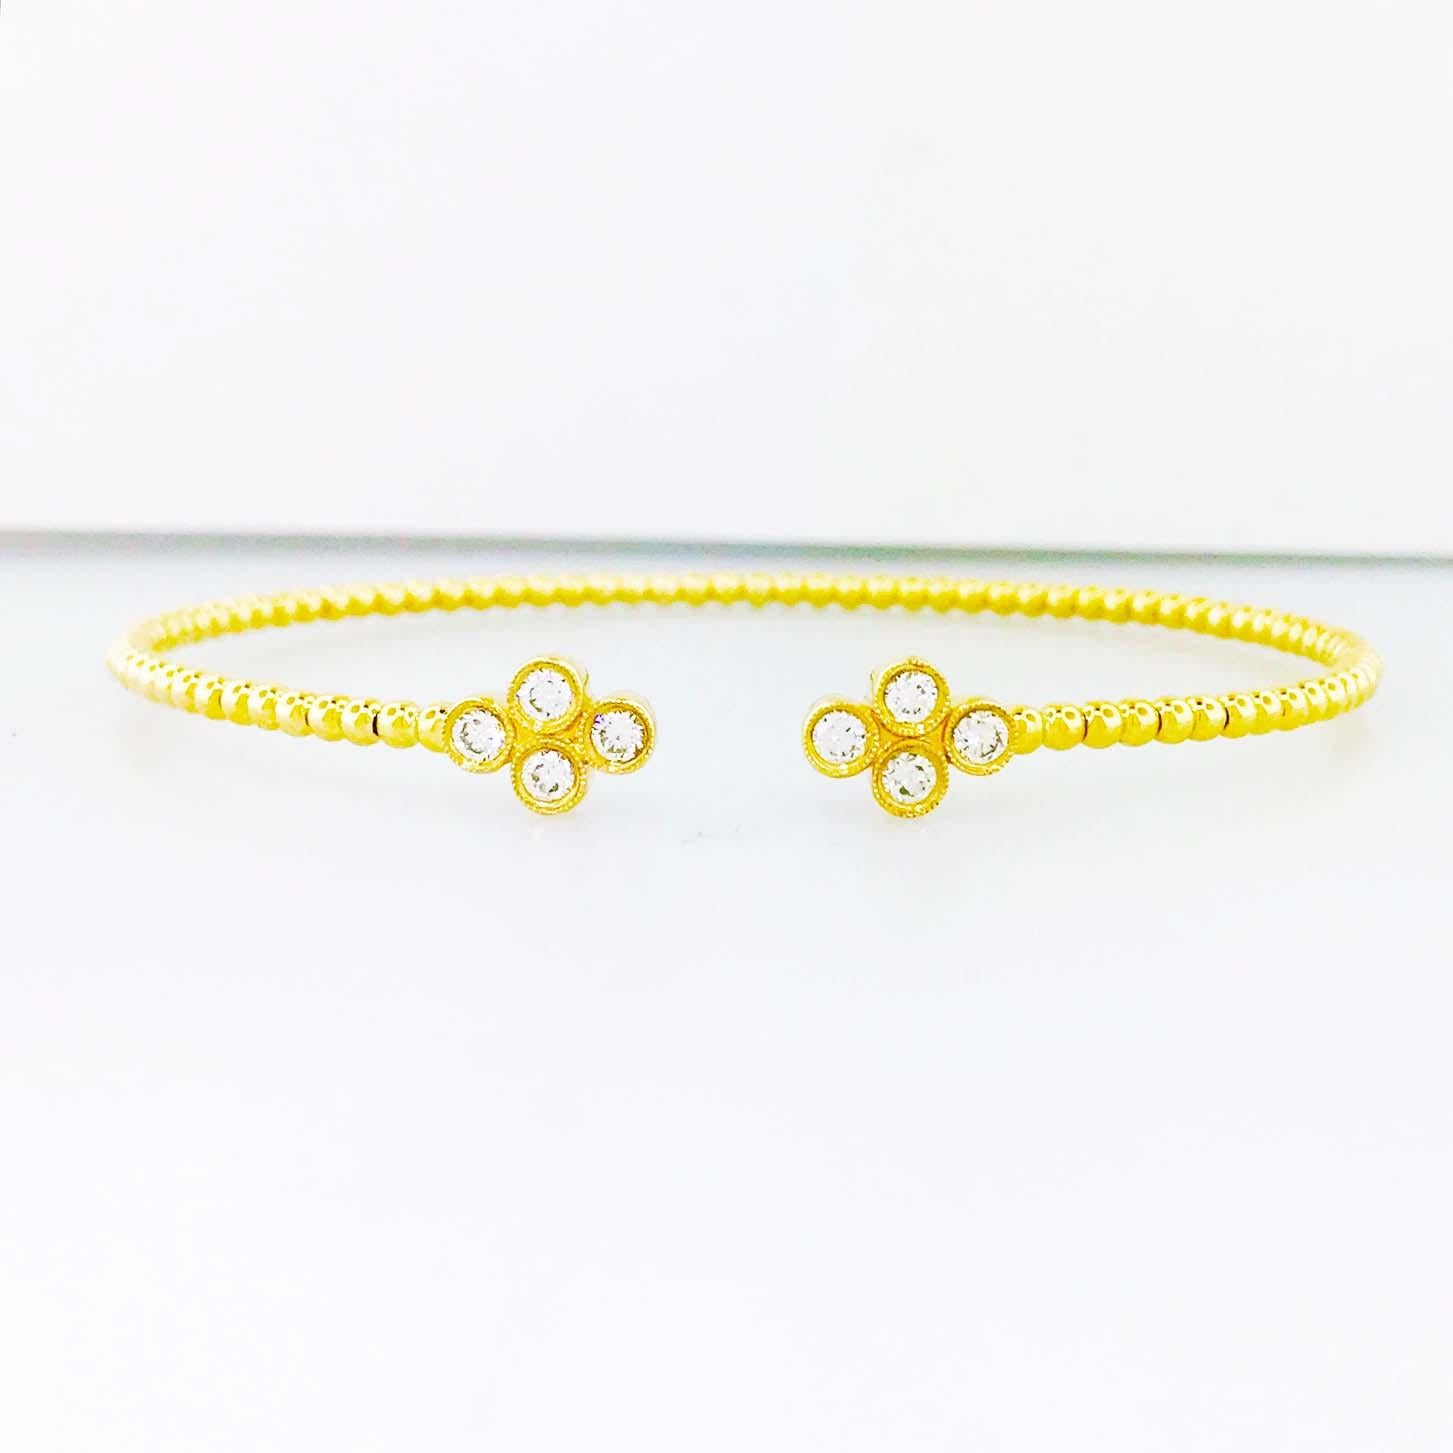 FUN! COLLECTIBLE! DESIGNER! DIAMOND FASHION BANGLE BRACELET! 

This fun designer diamond bangle bracelet is so adorable and looks great on everyone! With four round diamonds set in a modern, clover shaped, bezel setting on each side this bracelet